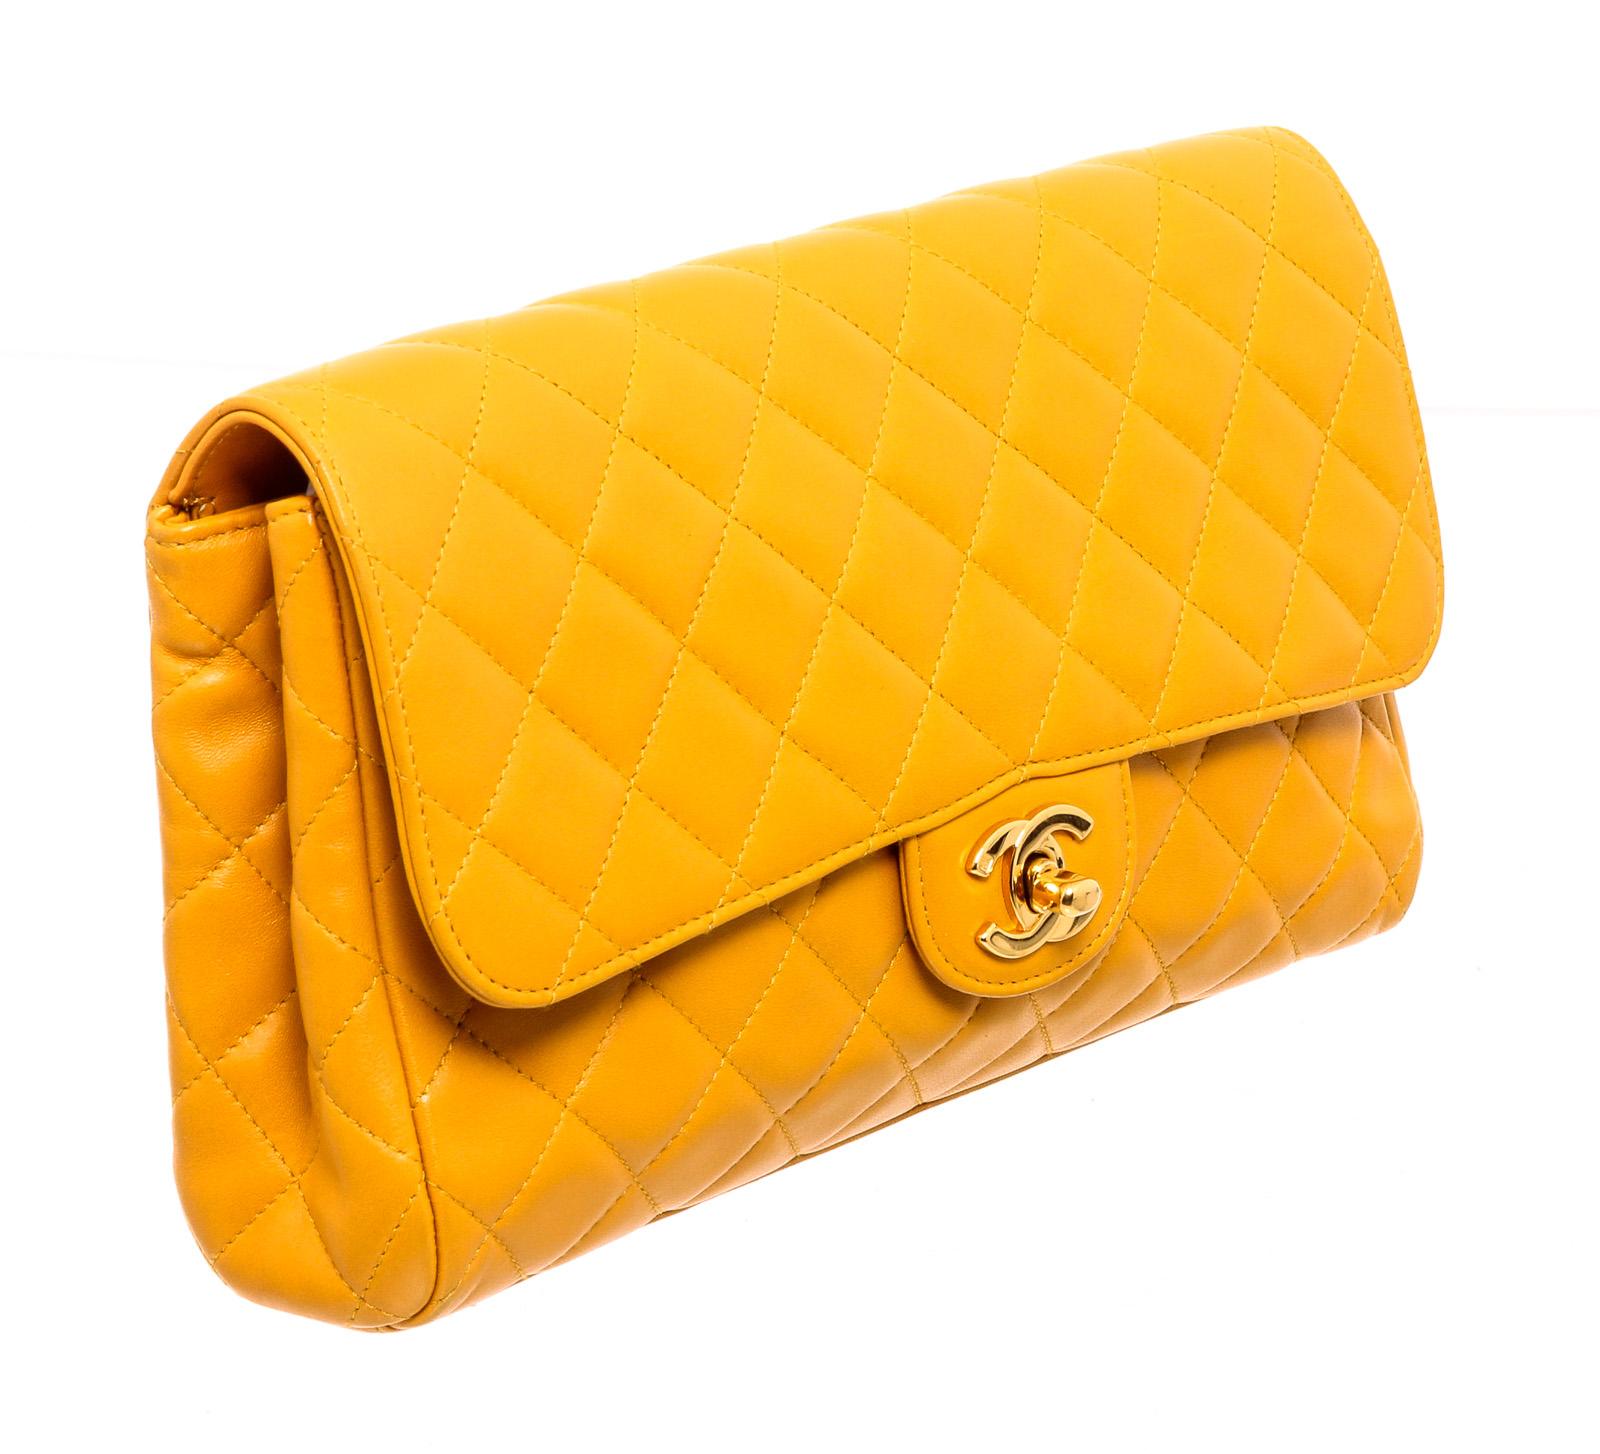 Chanel yellow quilted leather Flap Clutch bag with gold-tone hardware, tonal leather lining, rear exterior slip pocket, interior zip pocket, interior slip pocket, and CC turn-lock closure.

24149MSC